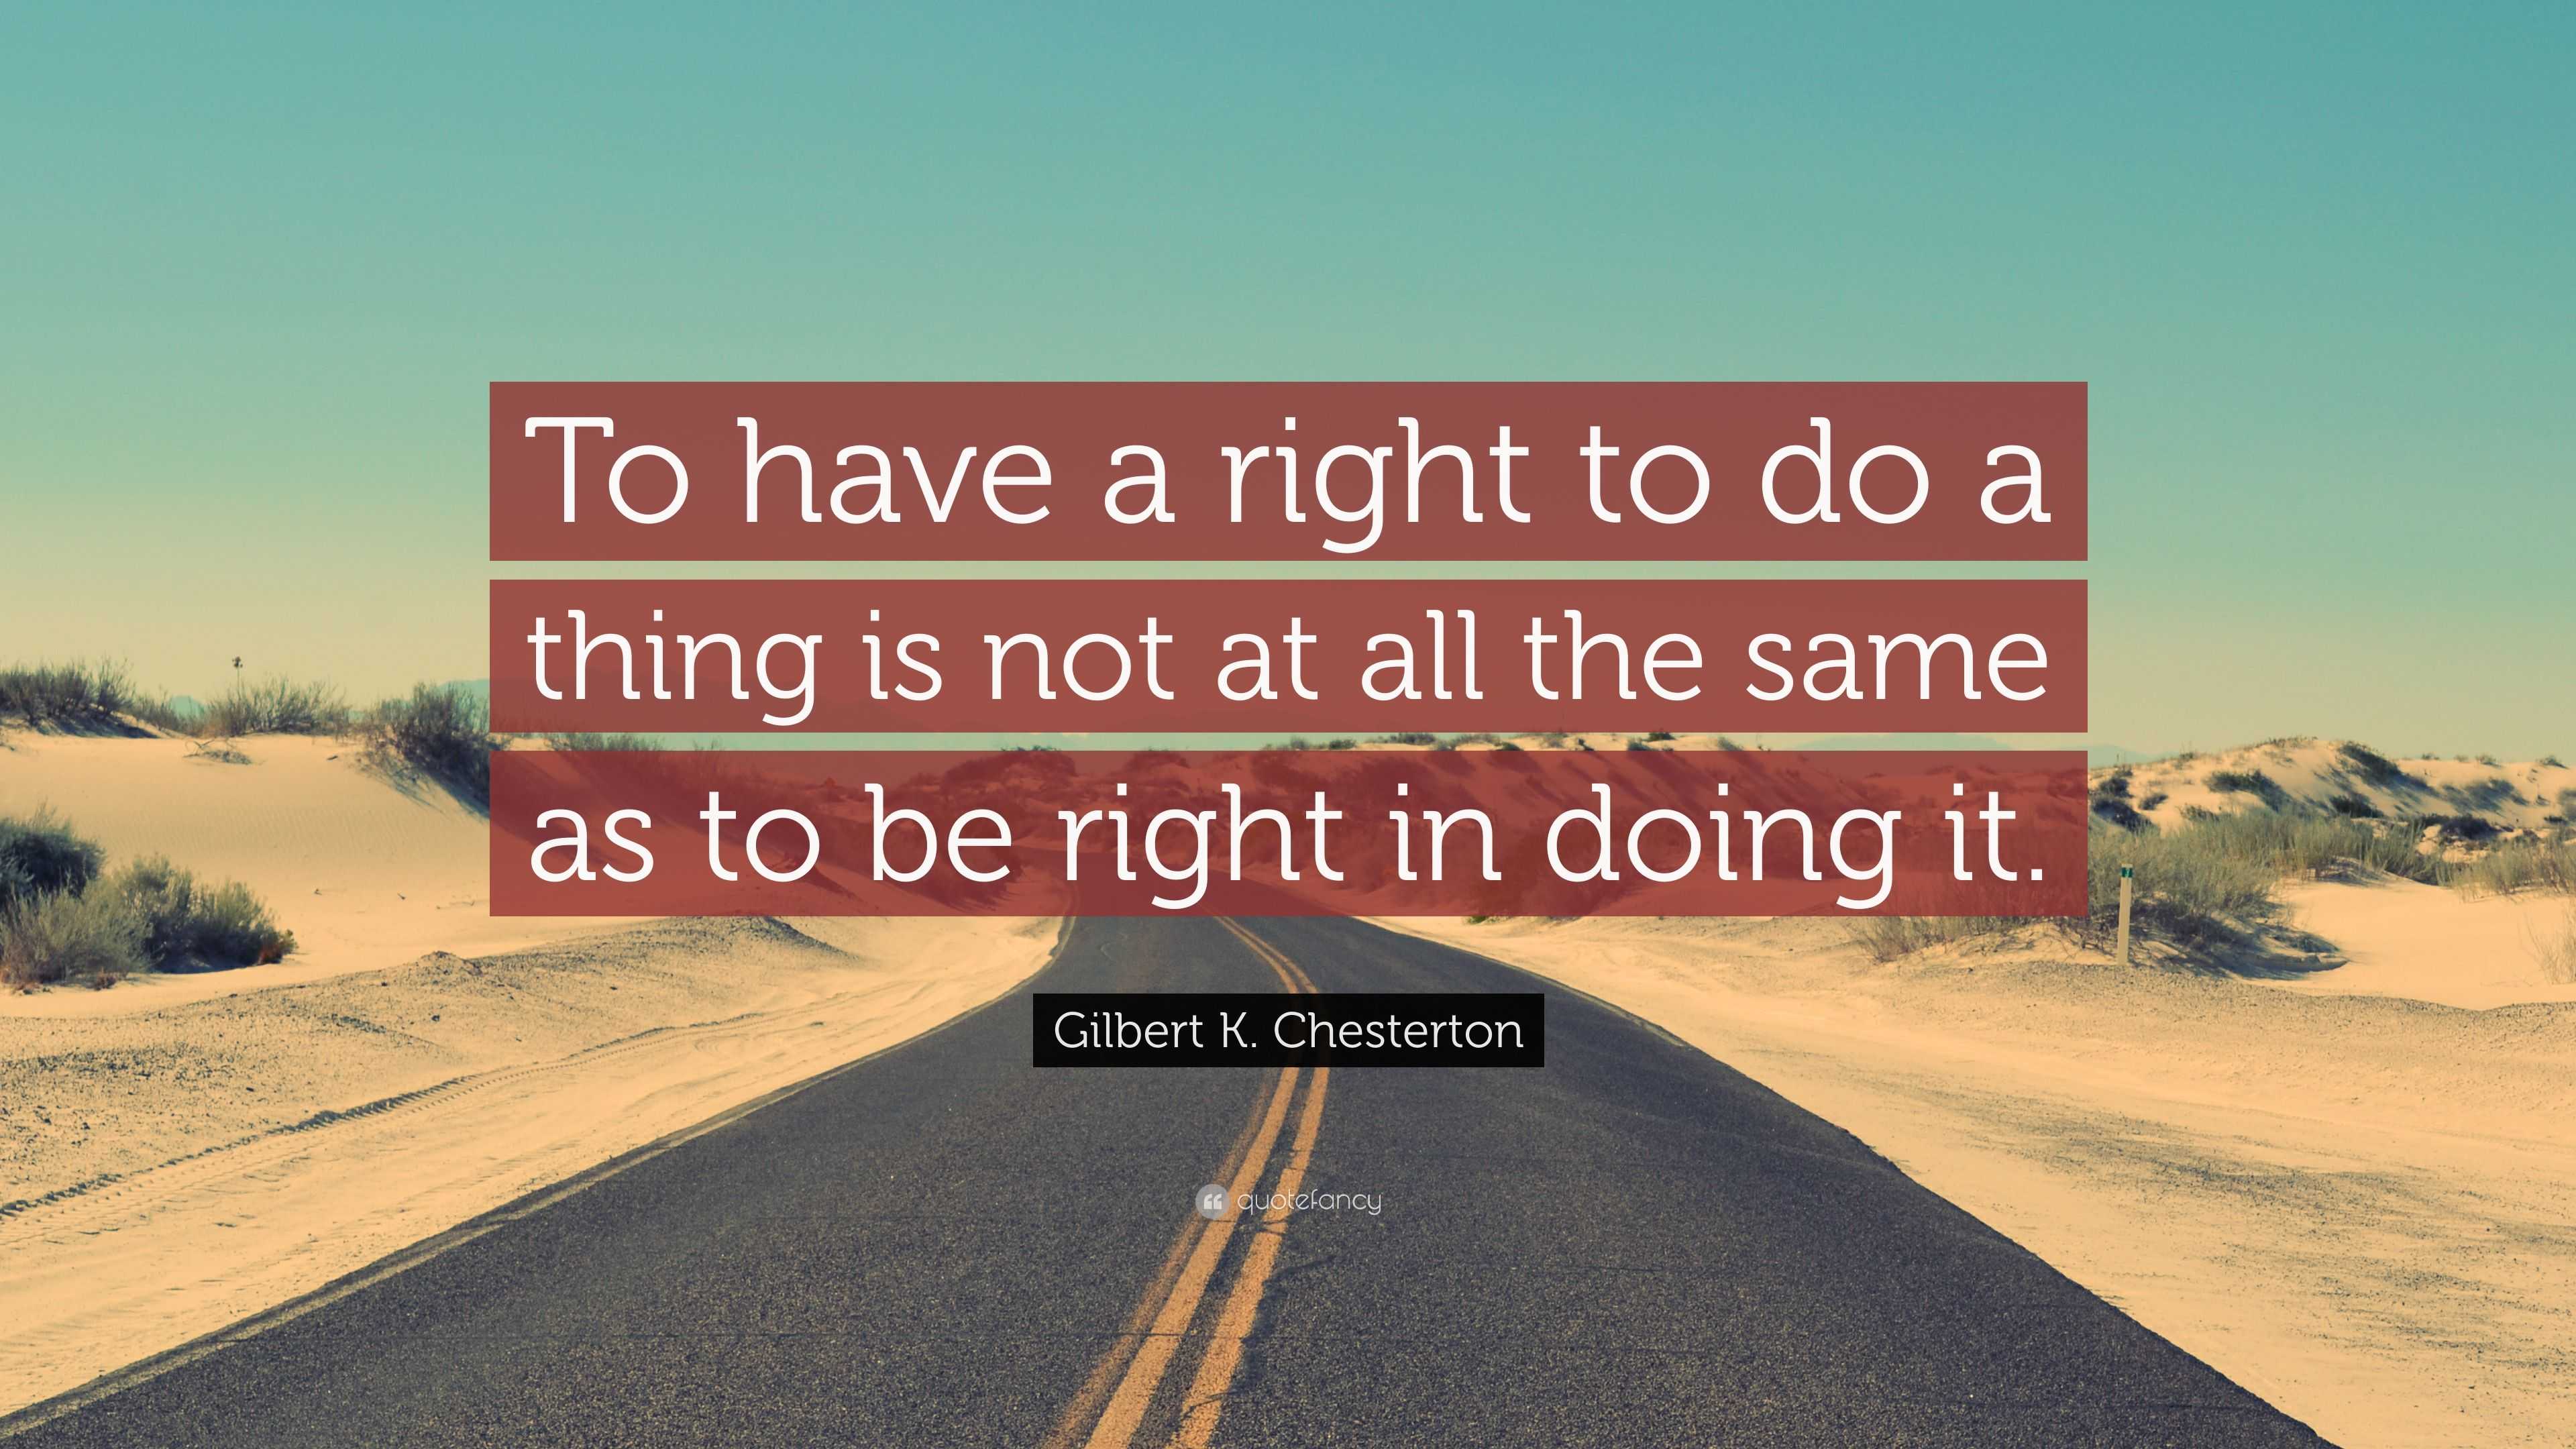 Gilbert K. Chesterton Quote: “To have a right to do a thing is not at ...